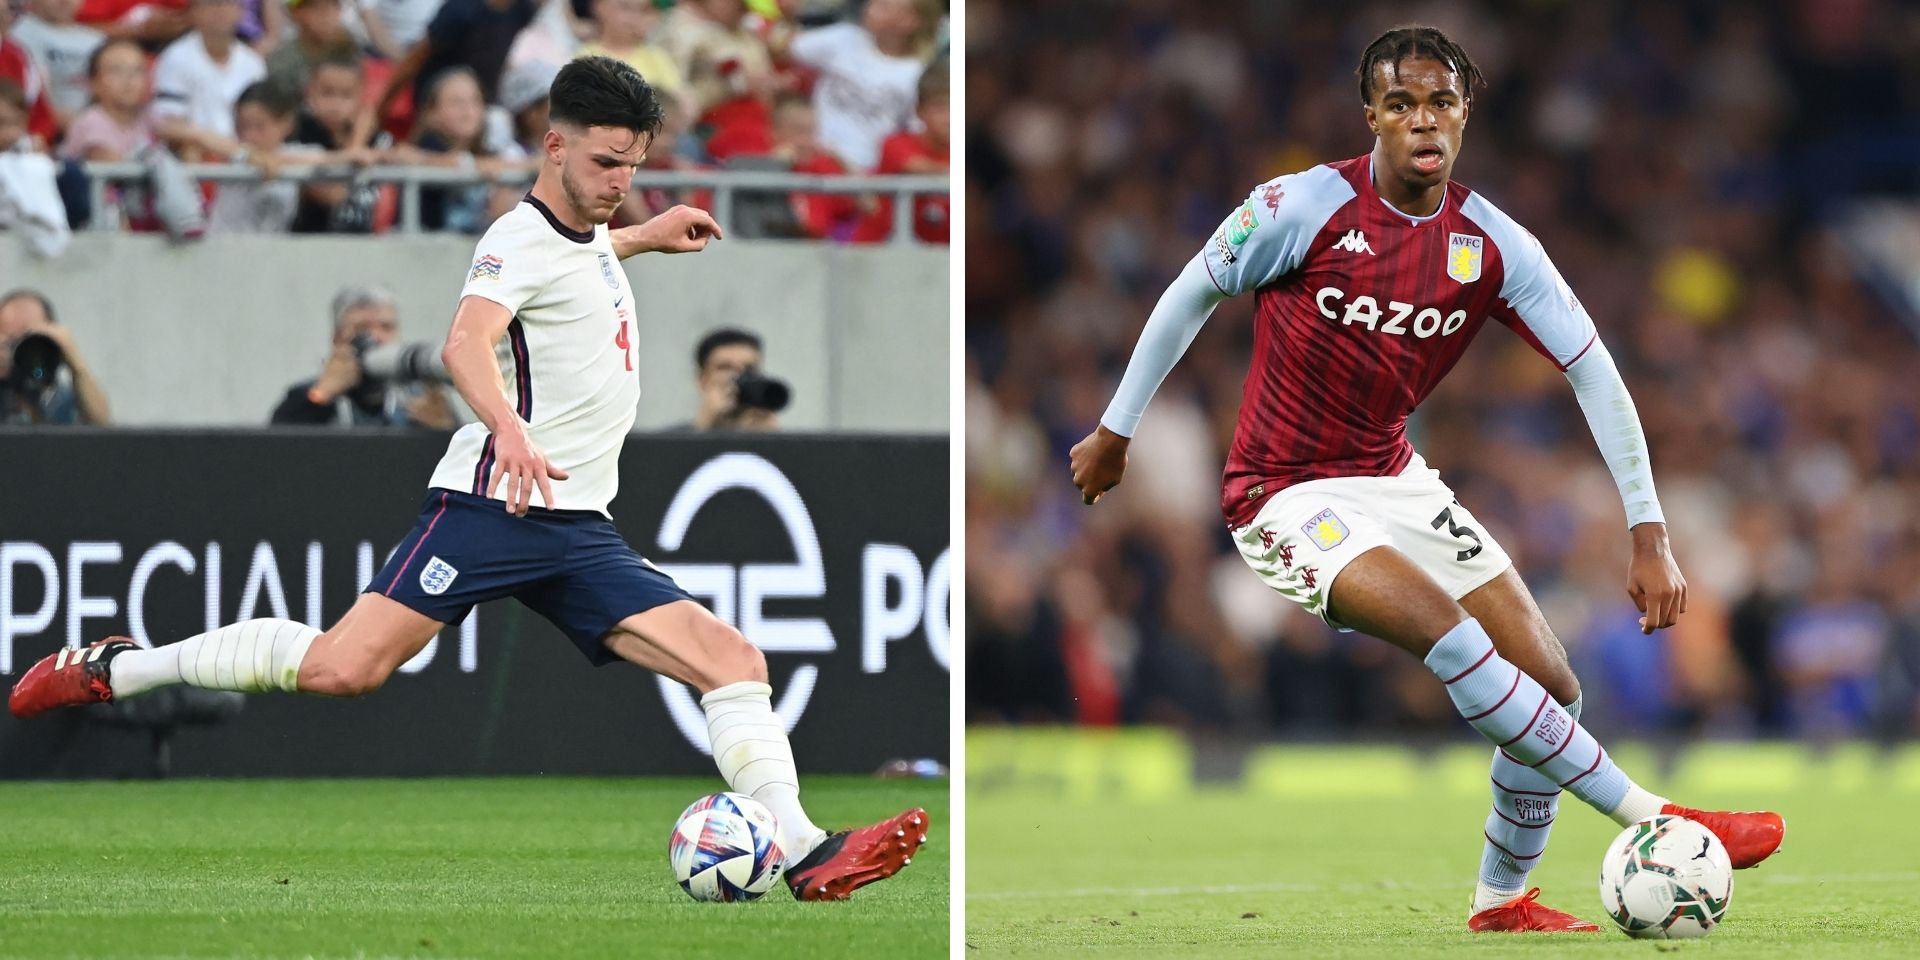 Two Premier League midfielders highlighted as potential acquisitions who could be ‘the long-term replacement for Bellingham’